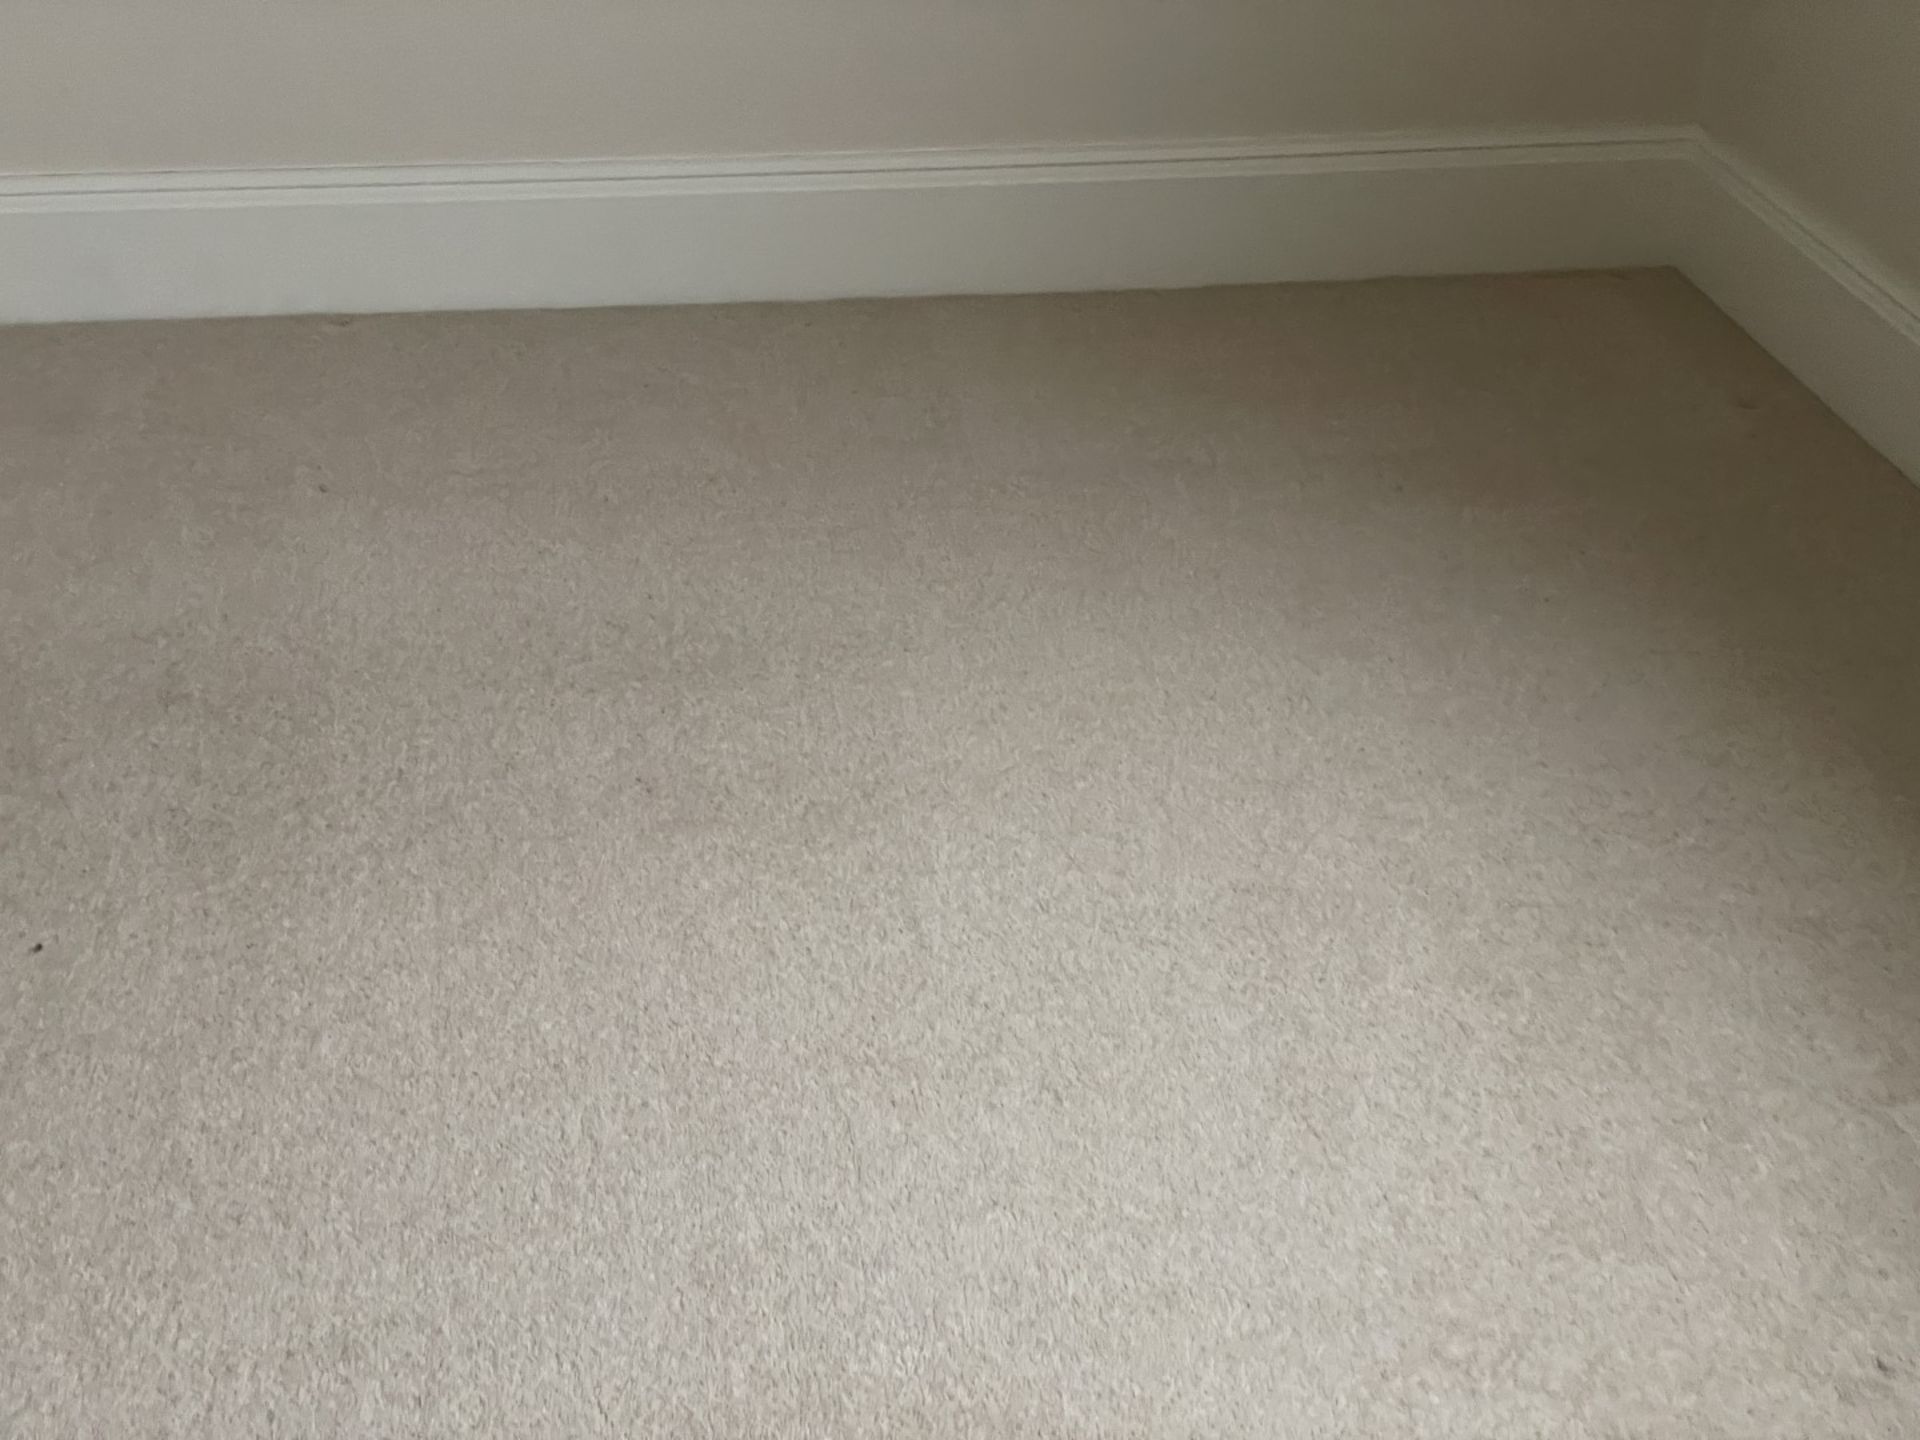 1 x Luxury Wool Master Dressing Room Carpet in a Neutral Tone with Premium Underlay - Image 5 of 5